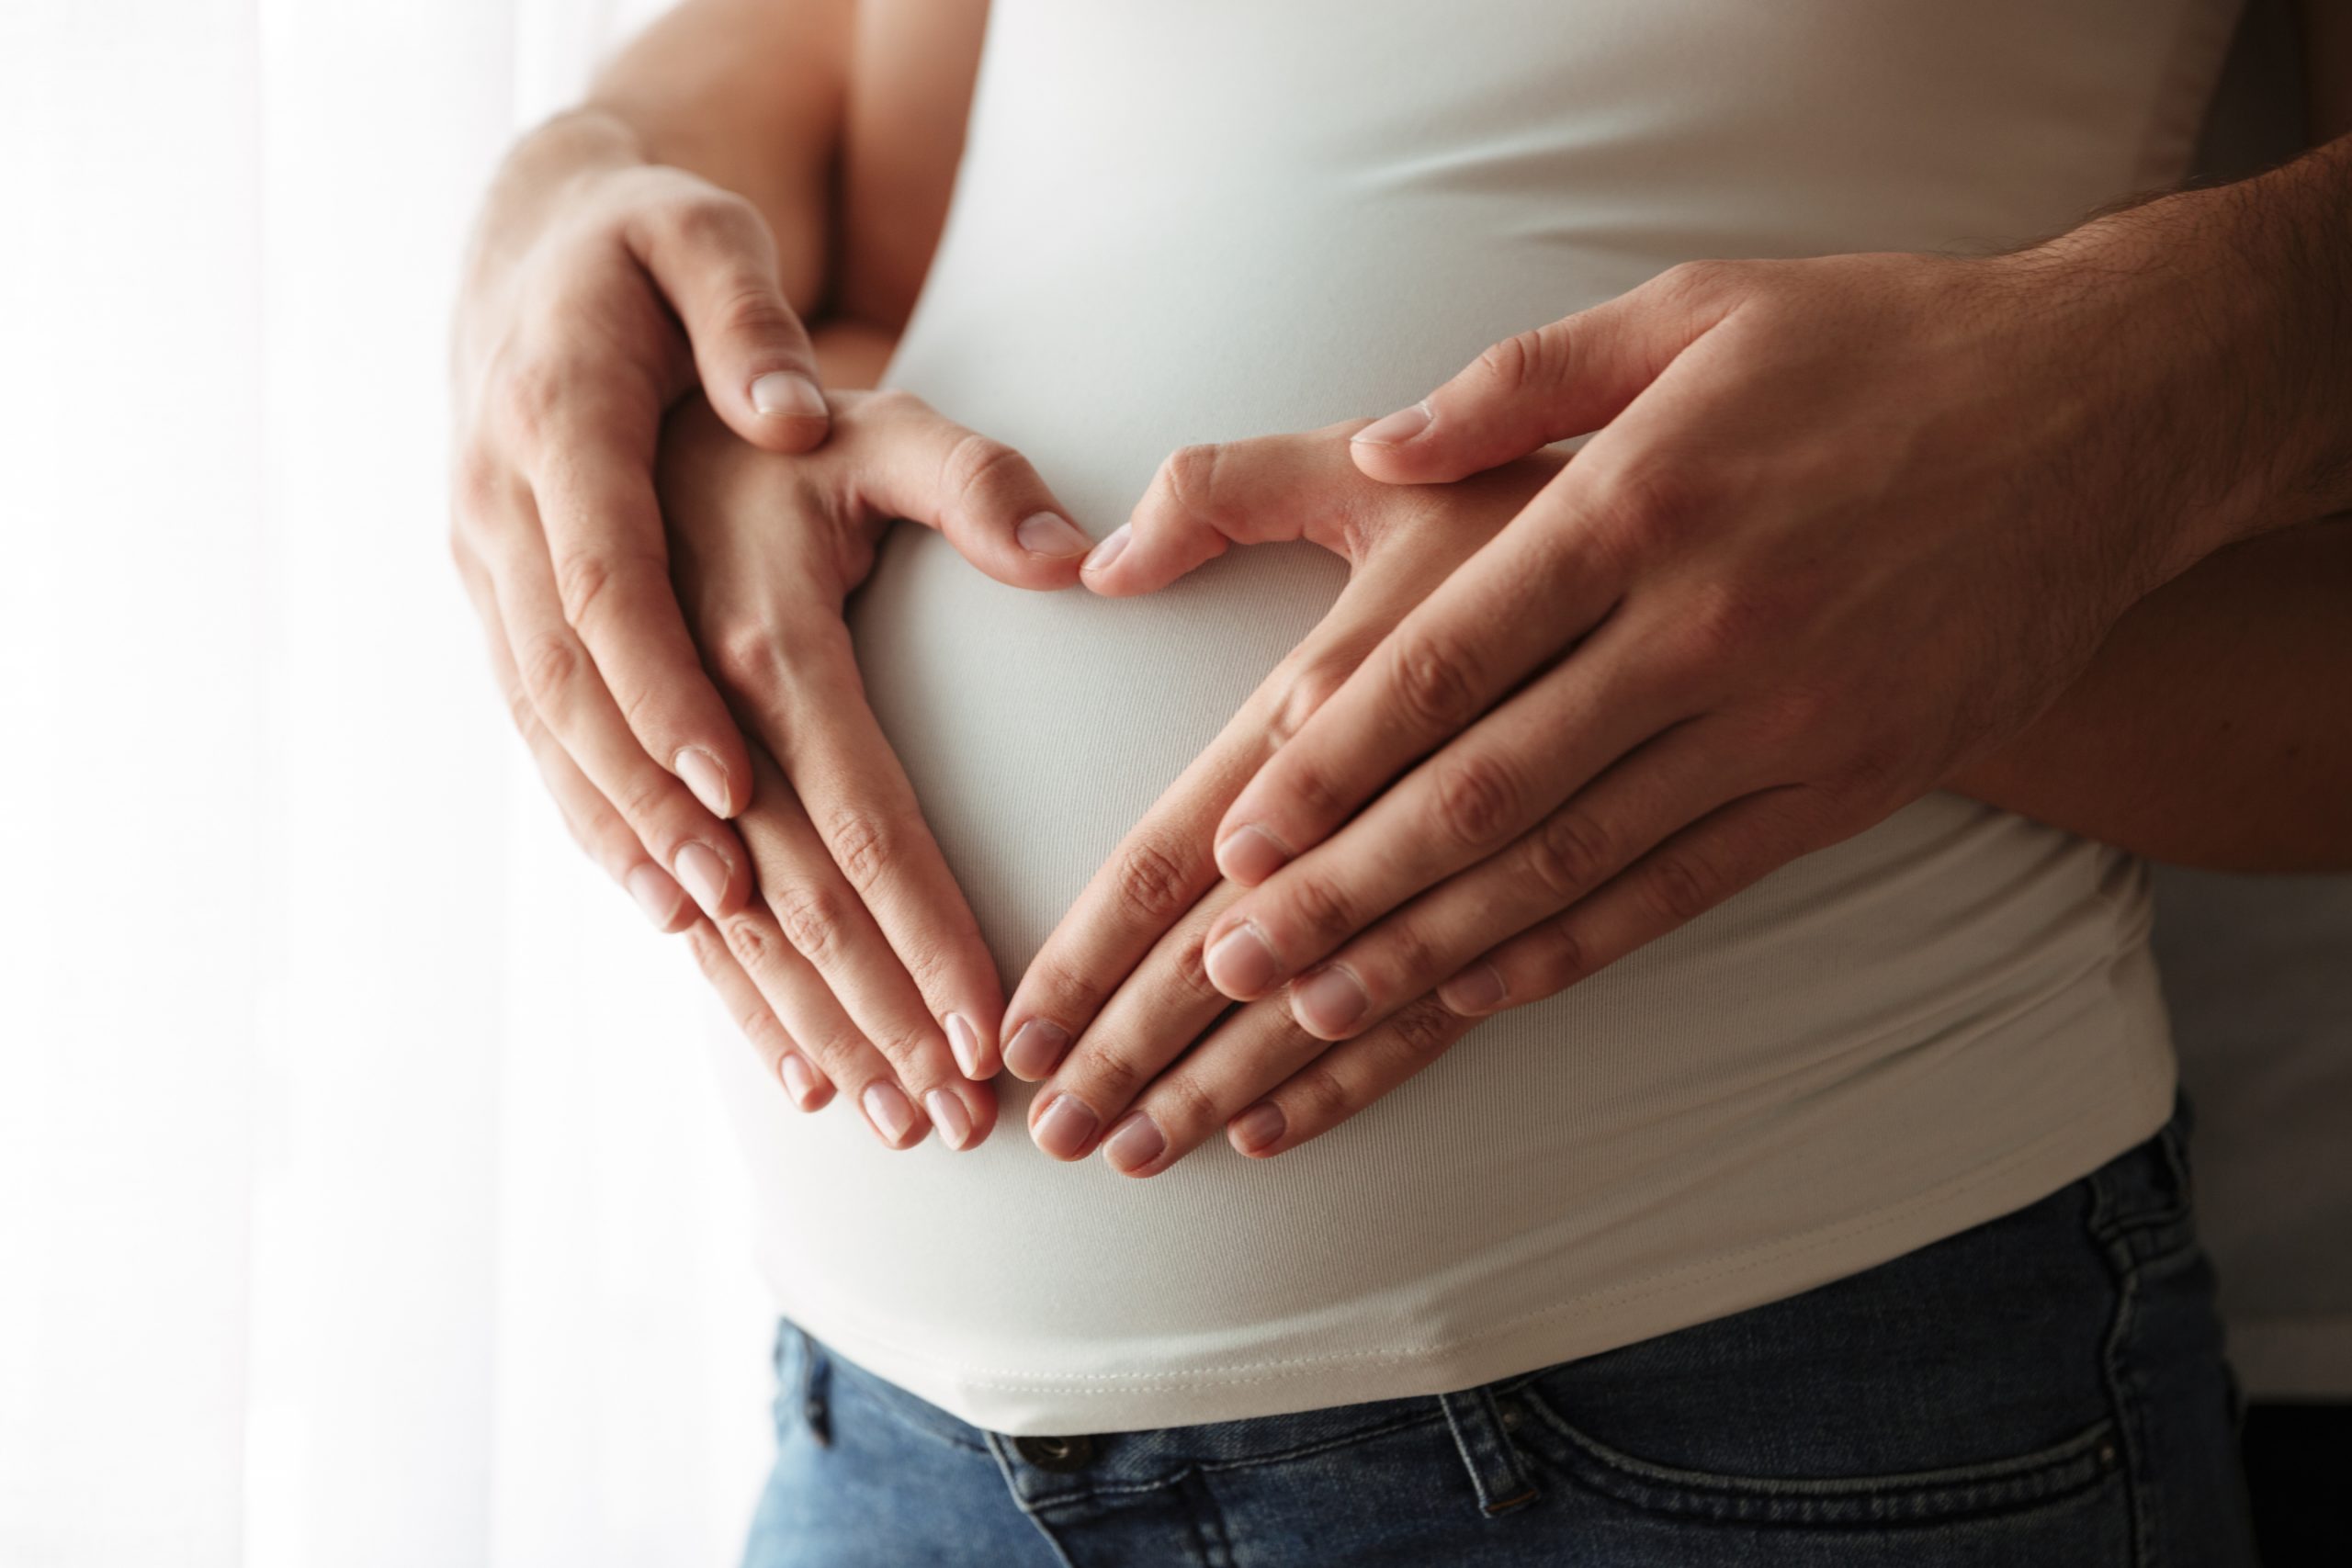 Natural Pregnancy after IVF Treatment